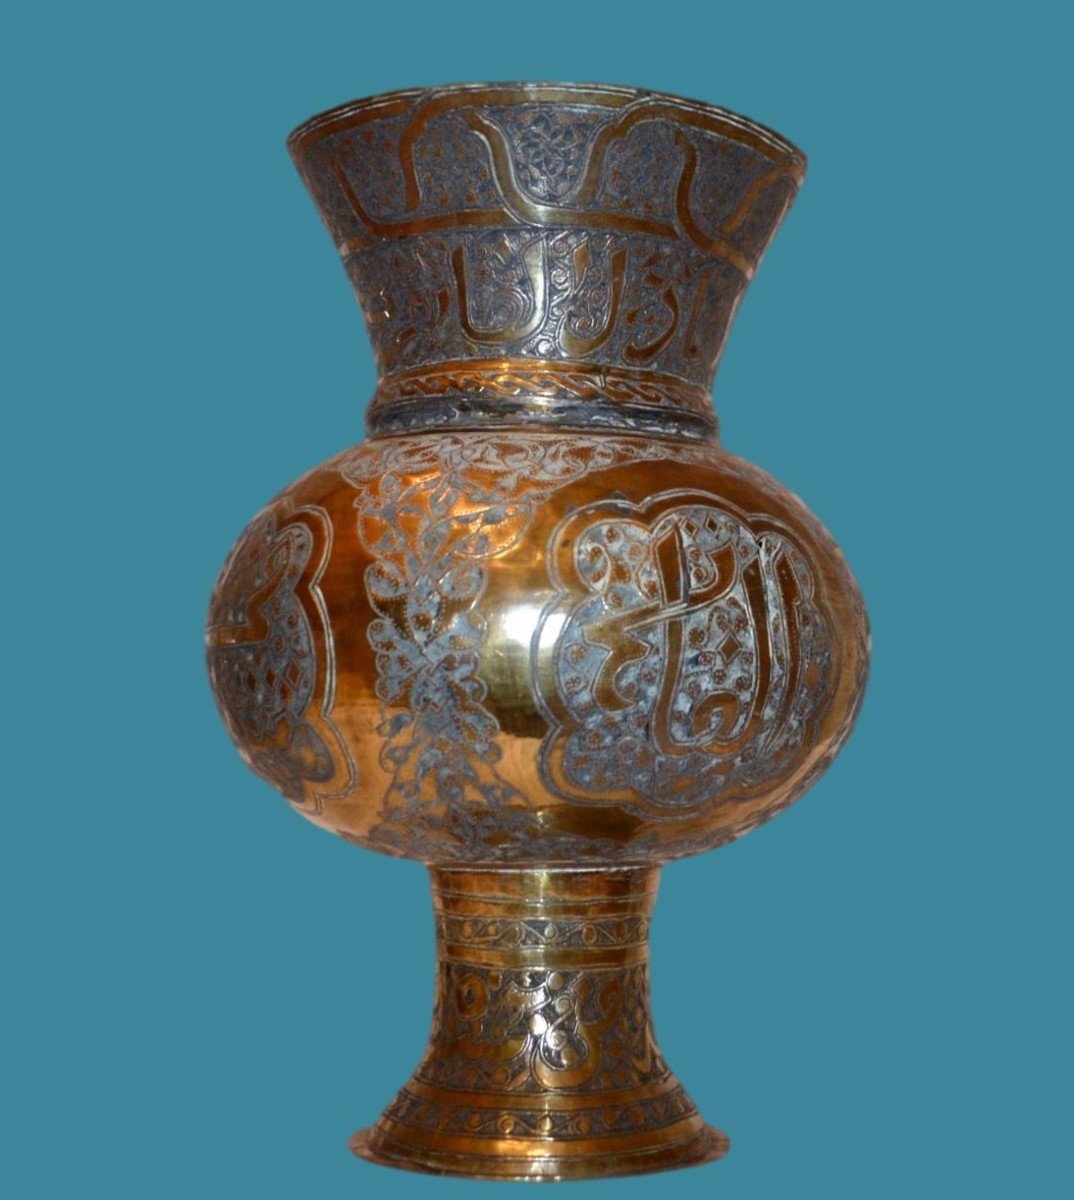 Important Islamic Vase In Brass Ornated With Calligraphy And Foliage XVIII - XIXth Century-photo-5